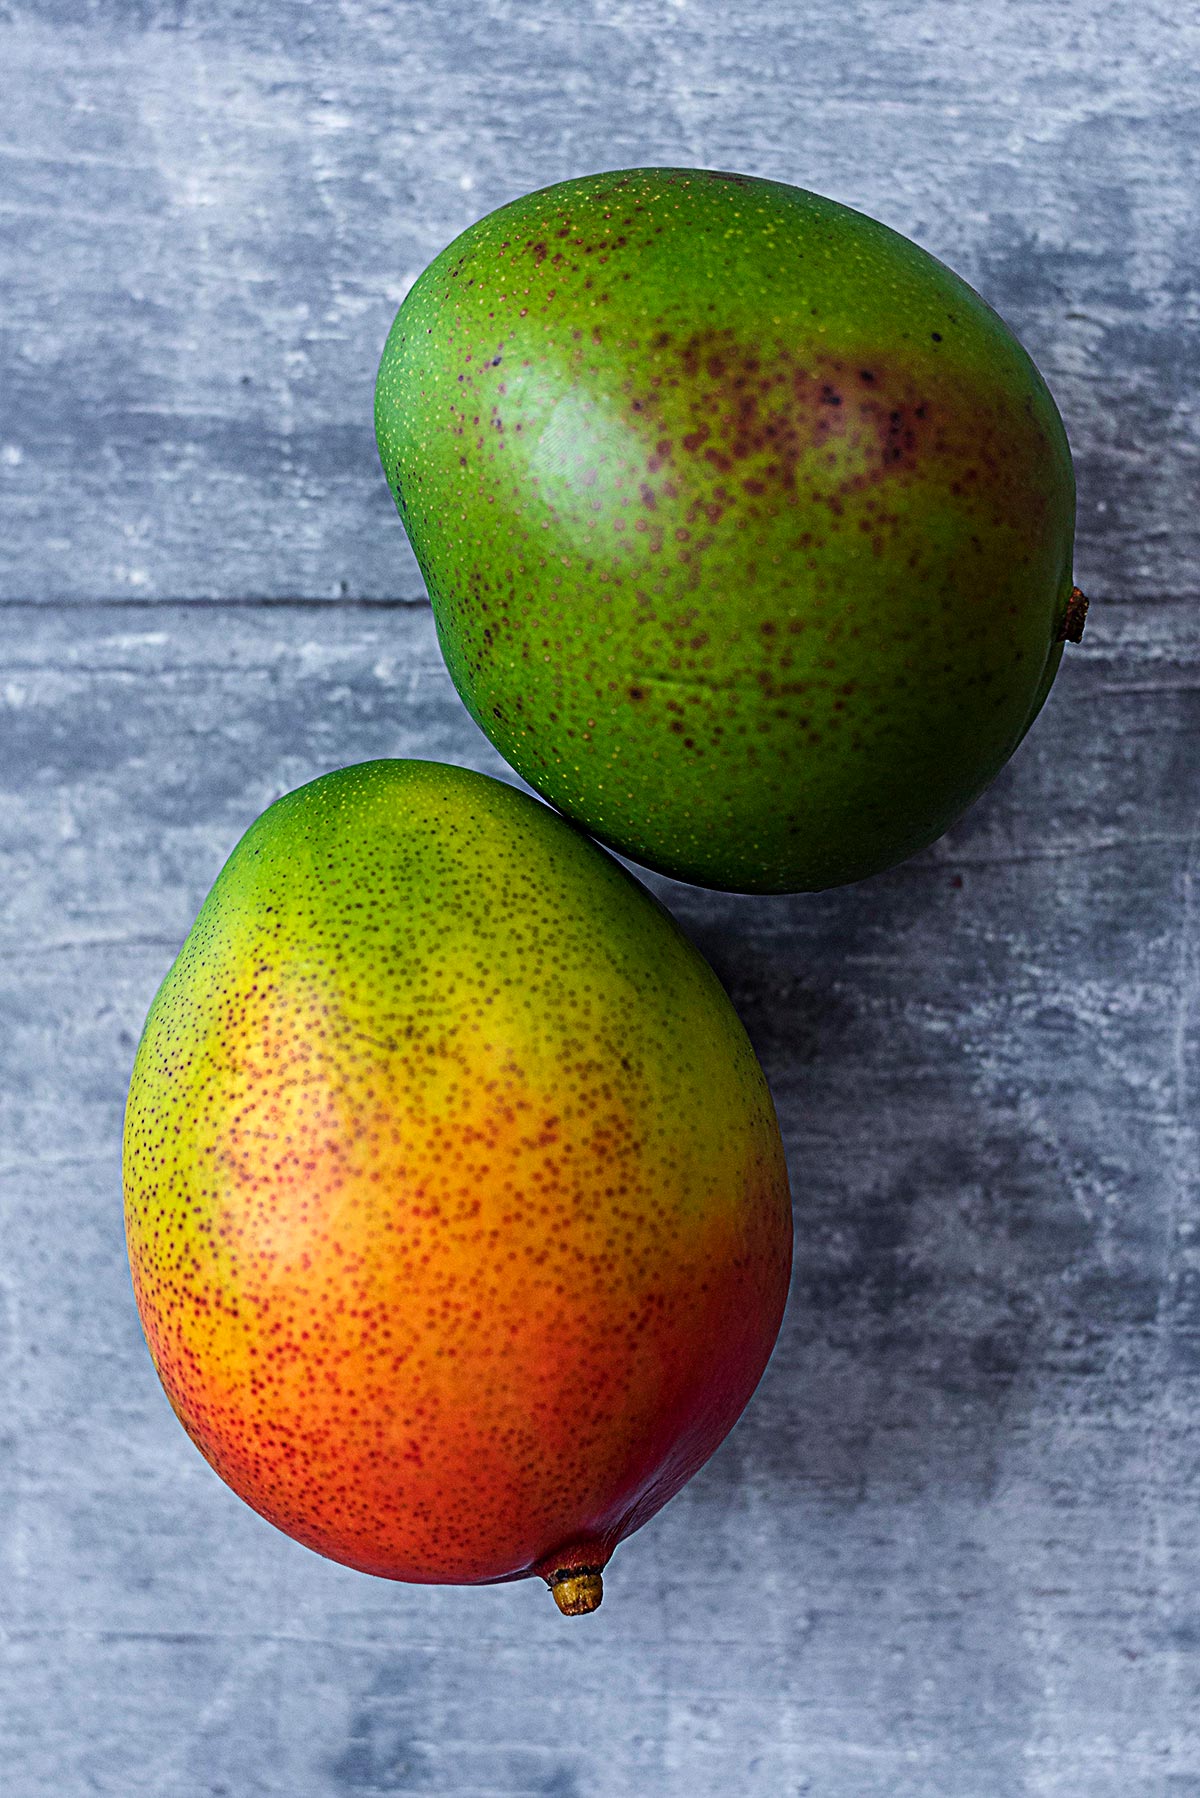 Two mangoes on a wooden surface. One is all green, one is green and red.